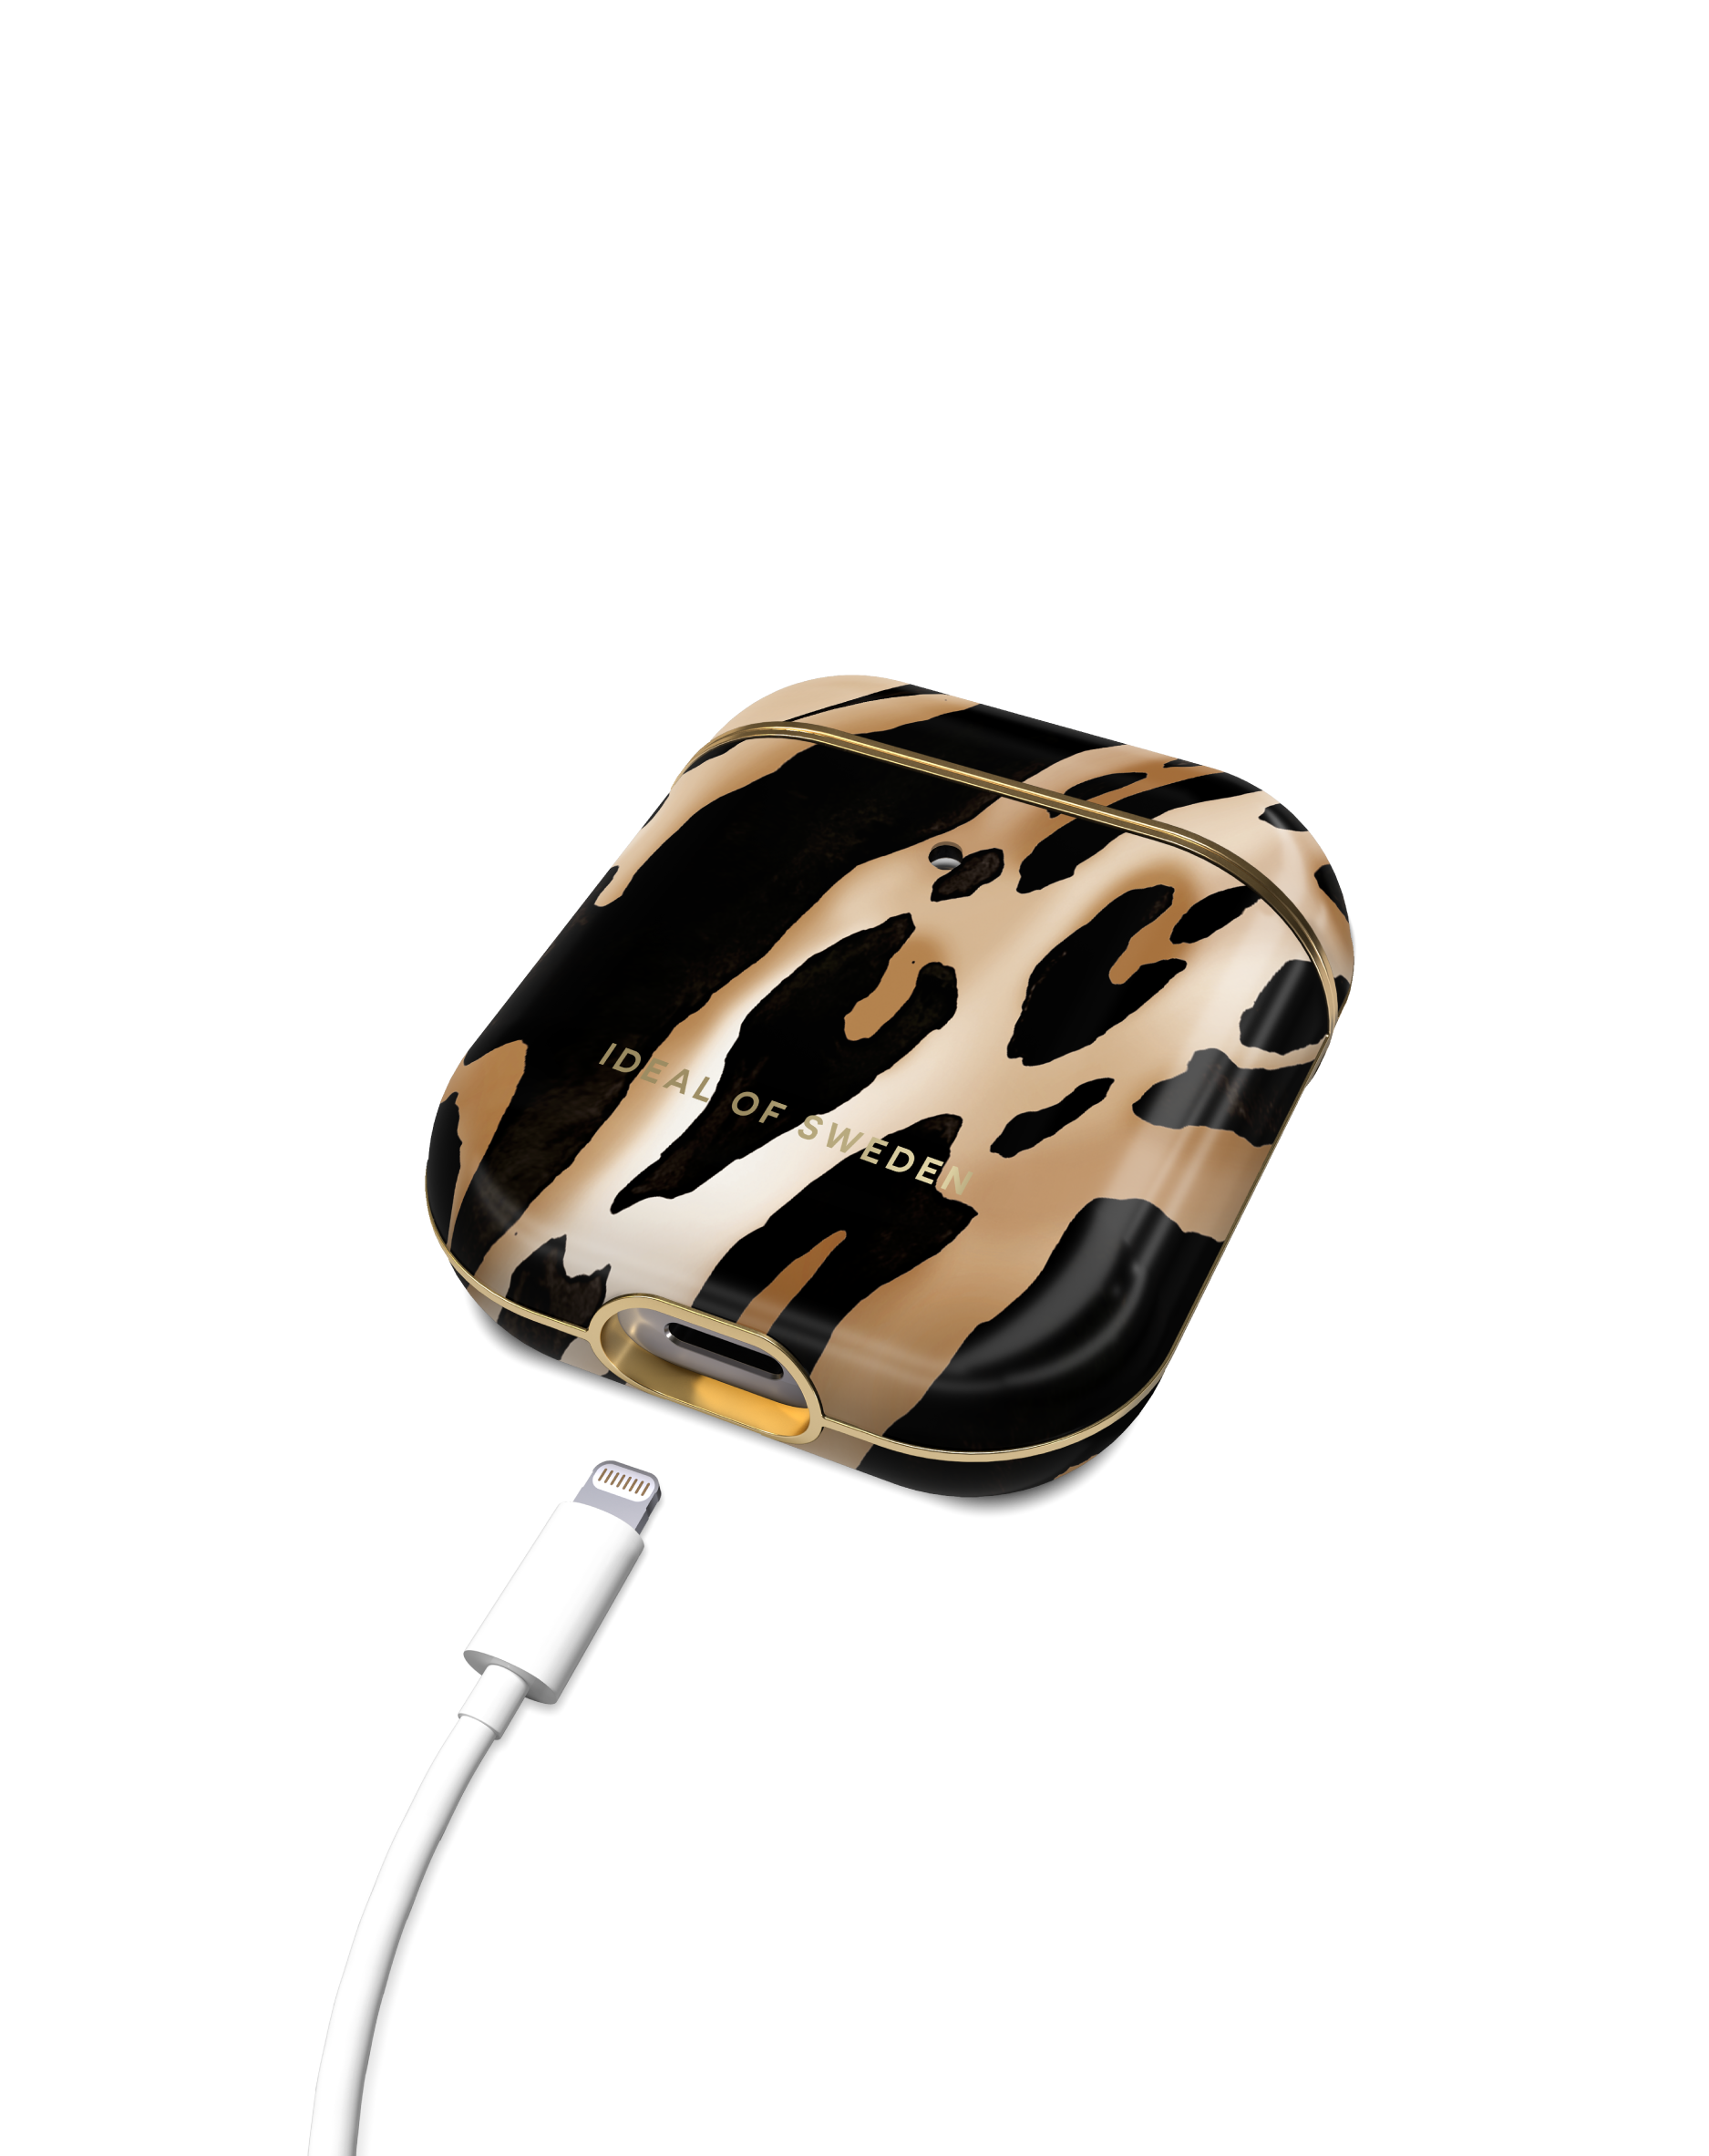 Cover passend OF IDEAL Iconic AirPod für: IDFAPCAW21-356 Full Case Leopard SWEDEN Apple